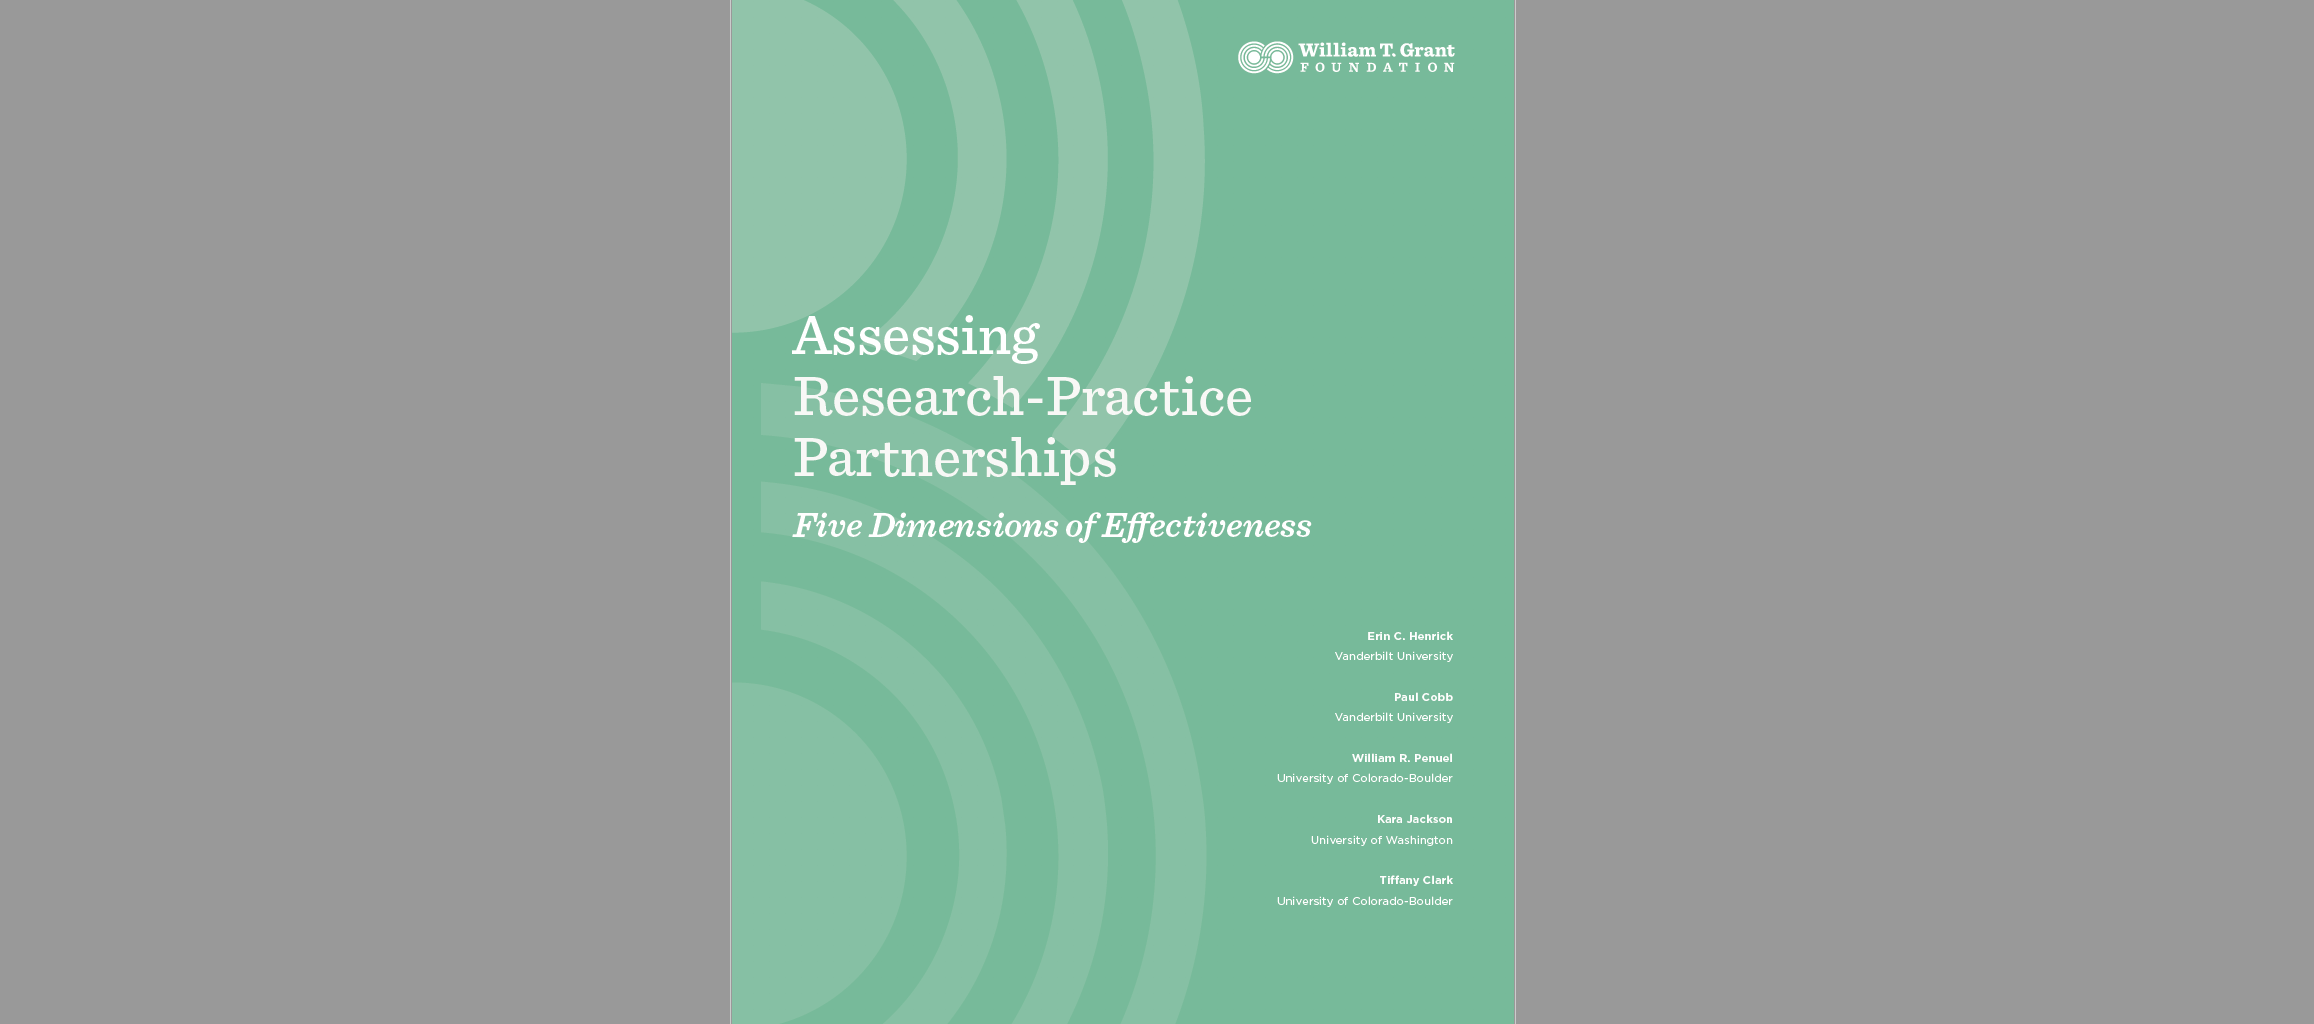 Assessing Research-Practice Partnerships